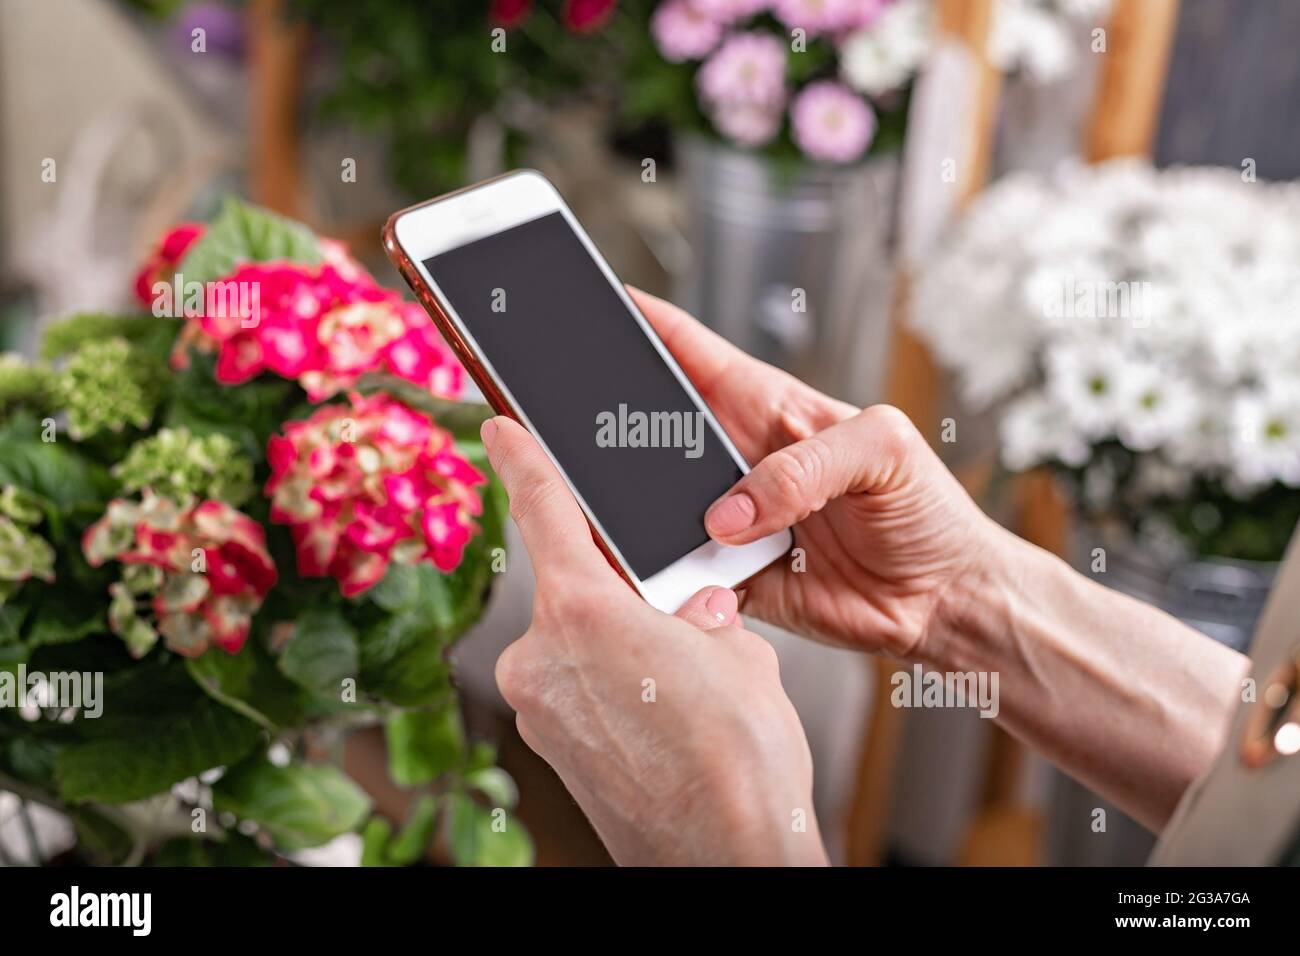 Close-up hands florist holding a smartphone. She accepts the order using Internet technologies. Florist workplace. Small business concept. Flowers and Stock Photo